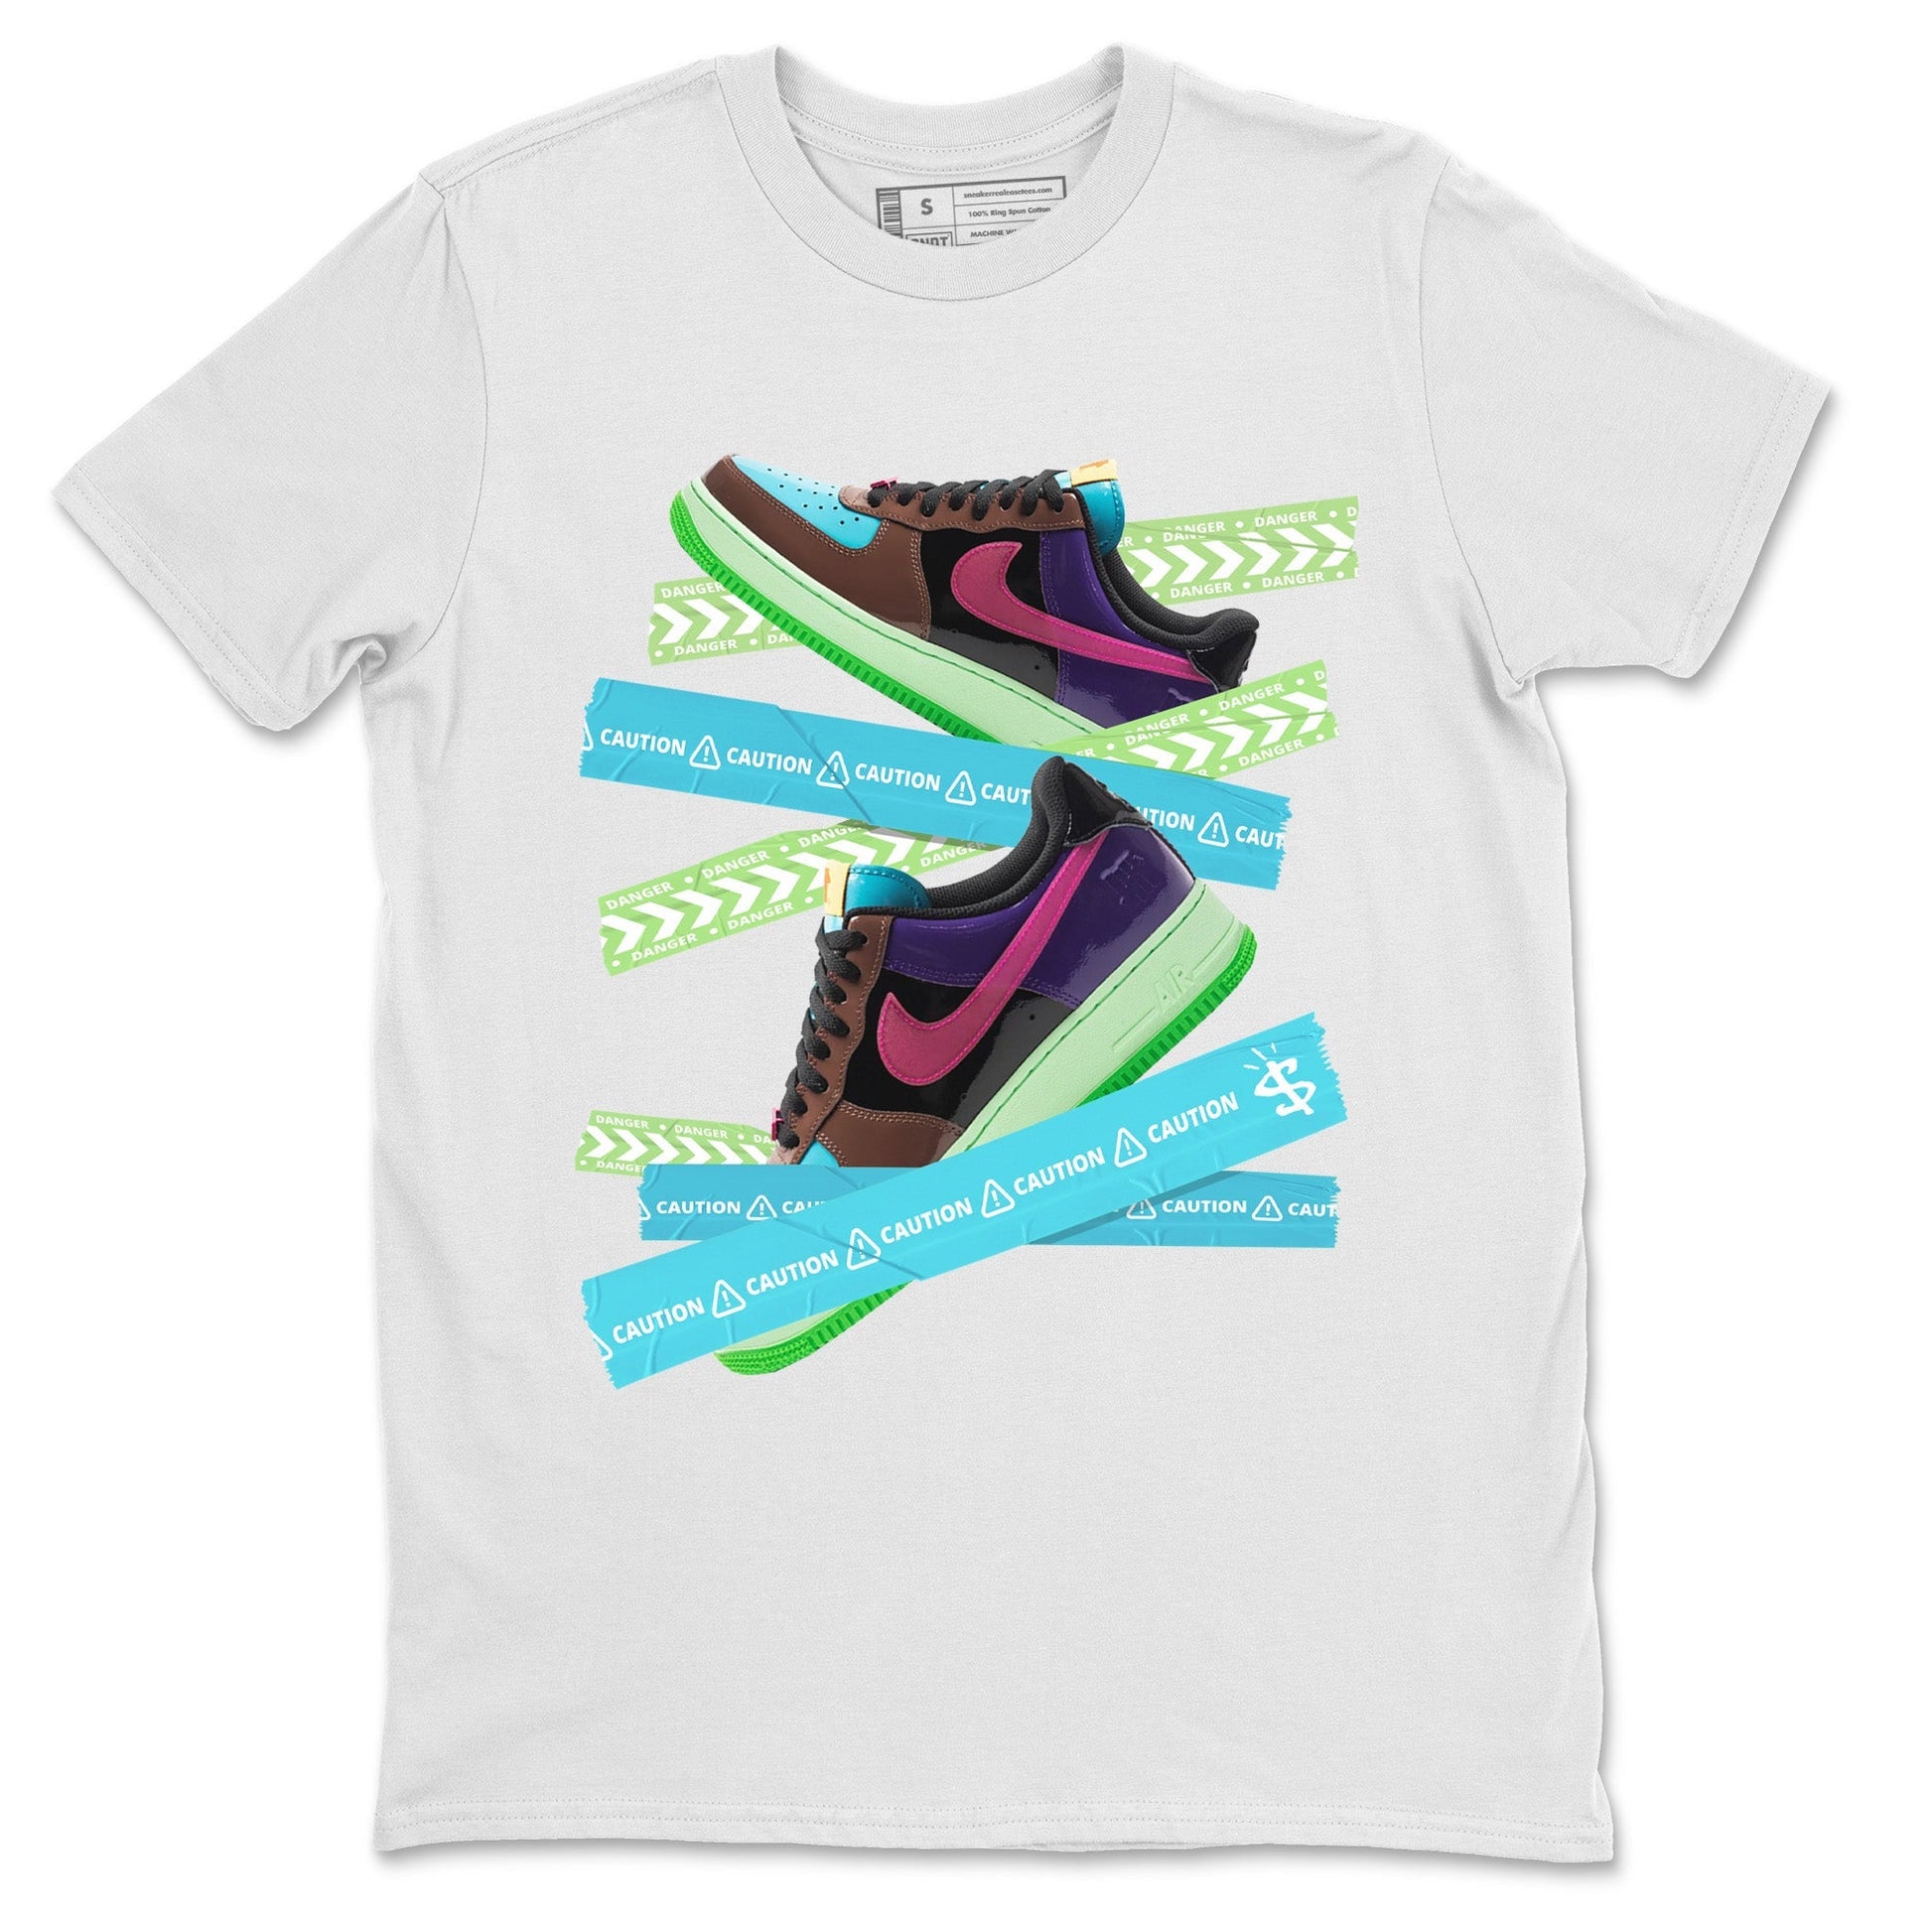 Air Force 1 Undefeated Fauna Brown Sneaker Match Tees Caution Tape Sneaker Tees Air Force 1 Undefeated Fauna Brown Sneaker Release Tees Unisex Shirts